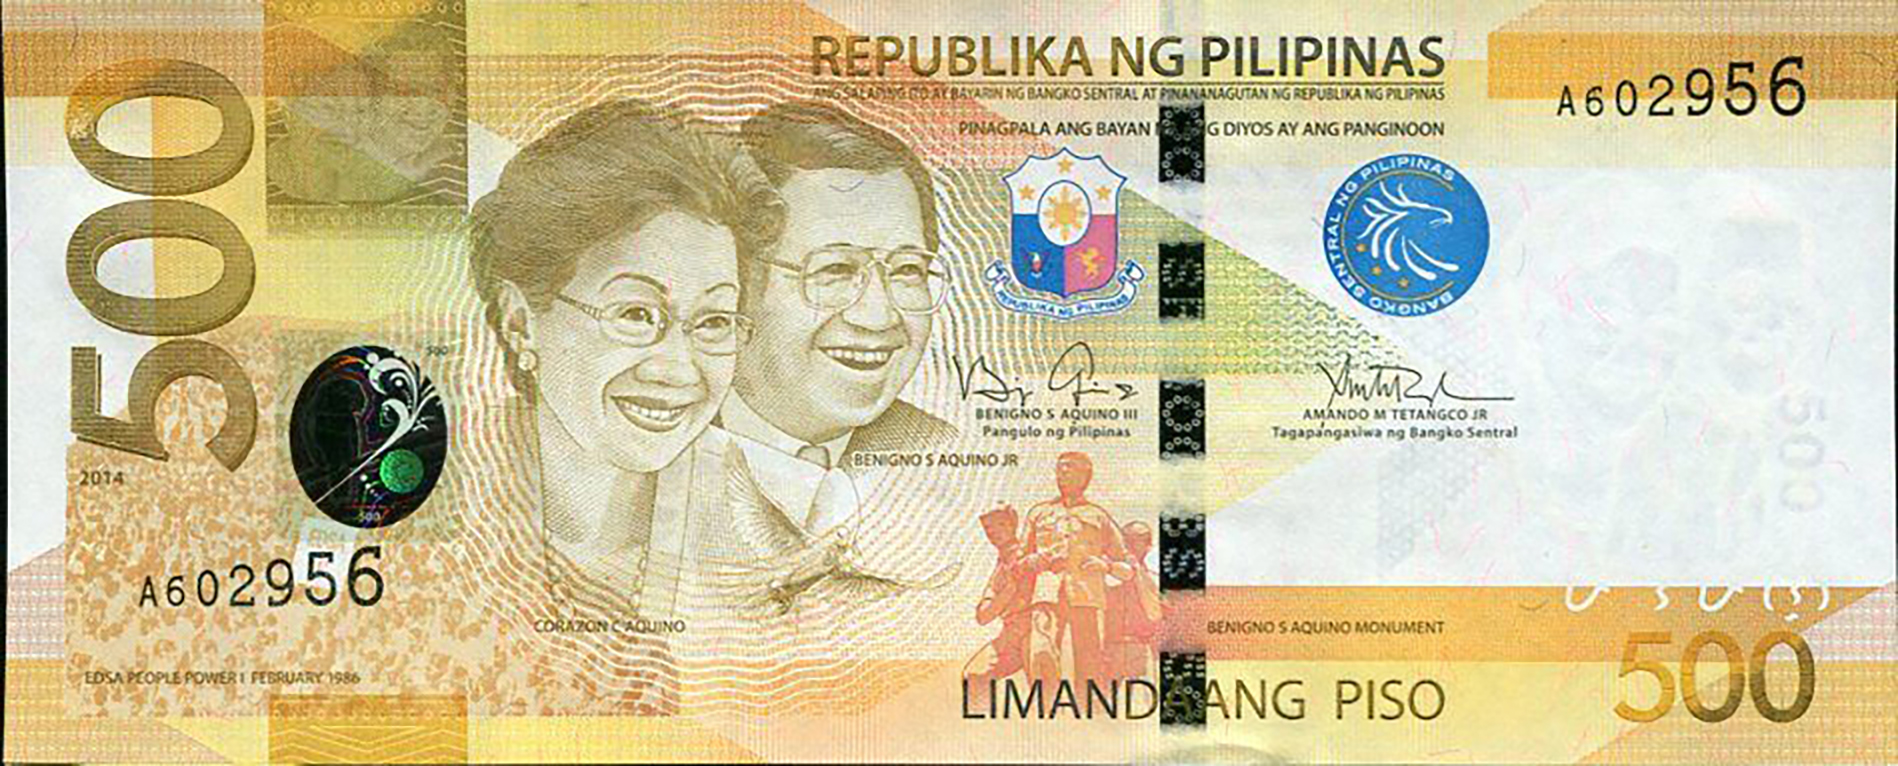 Philippines new date (2013) 500-peso note (B1049p) confirmed – BanknoteNews